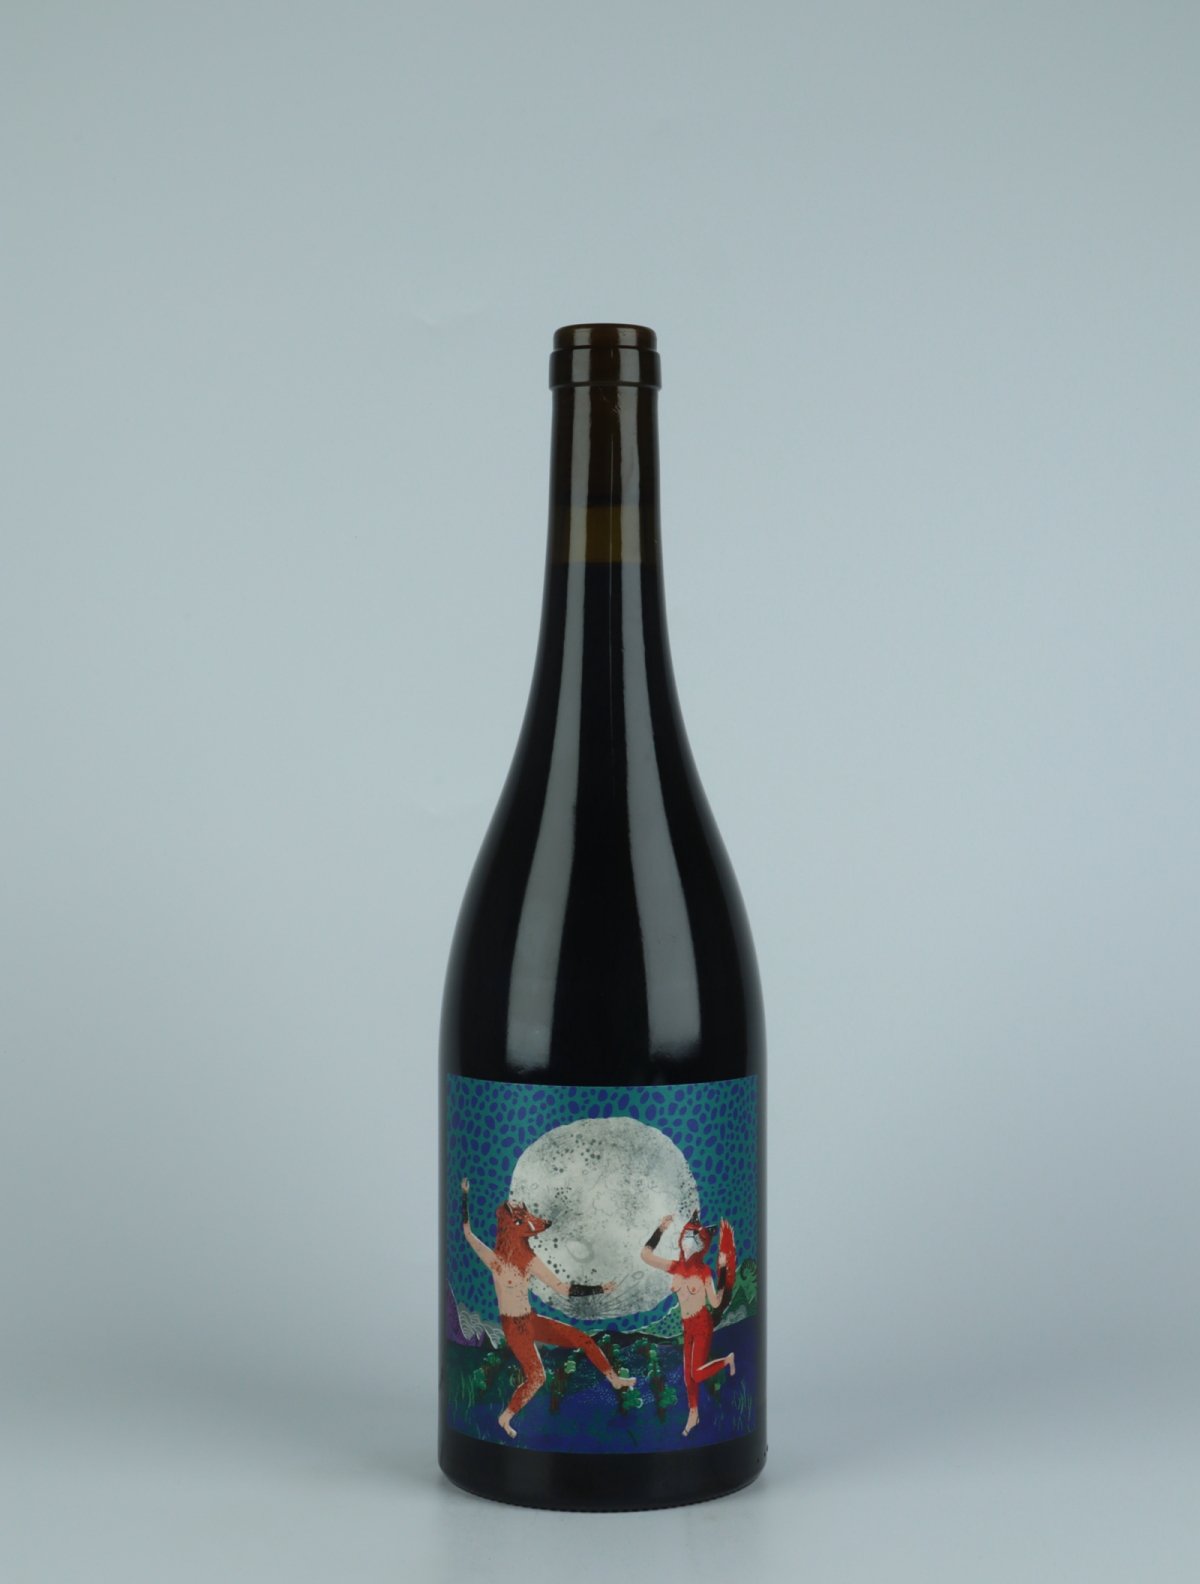 A bottle 2021 Luna Llena Red wine from Kindeli, Nelson in New Zealand